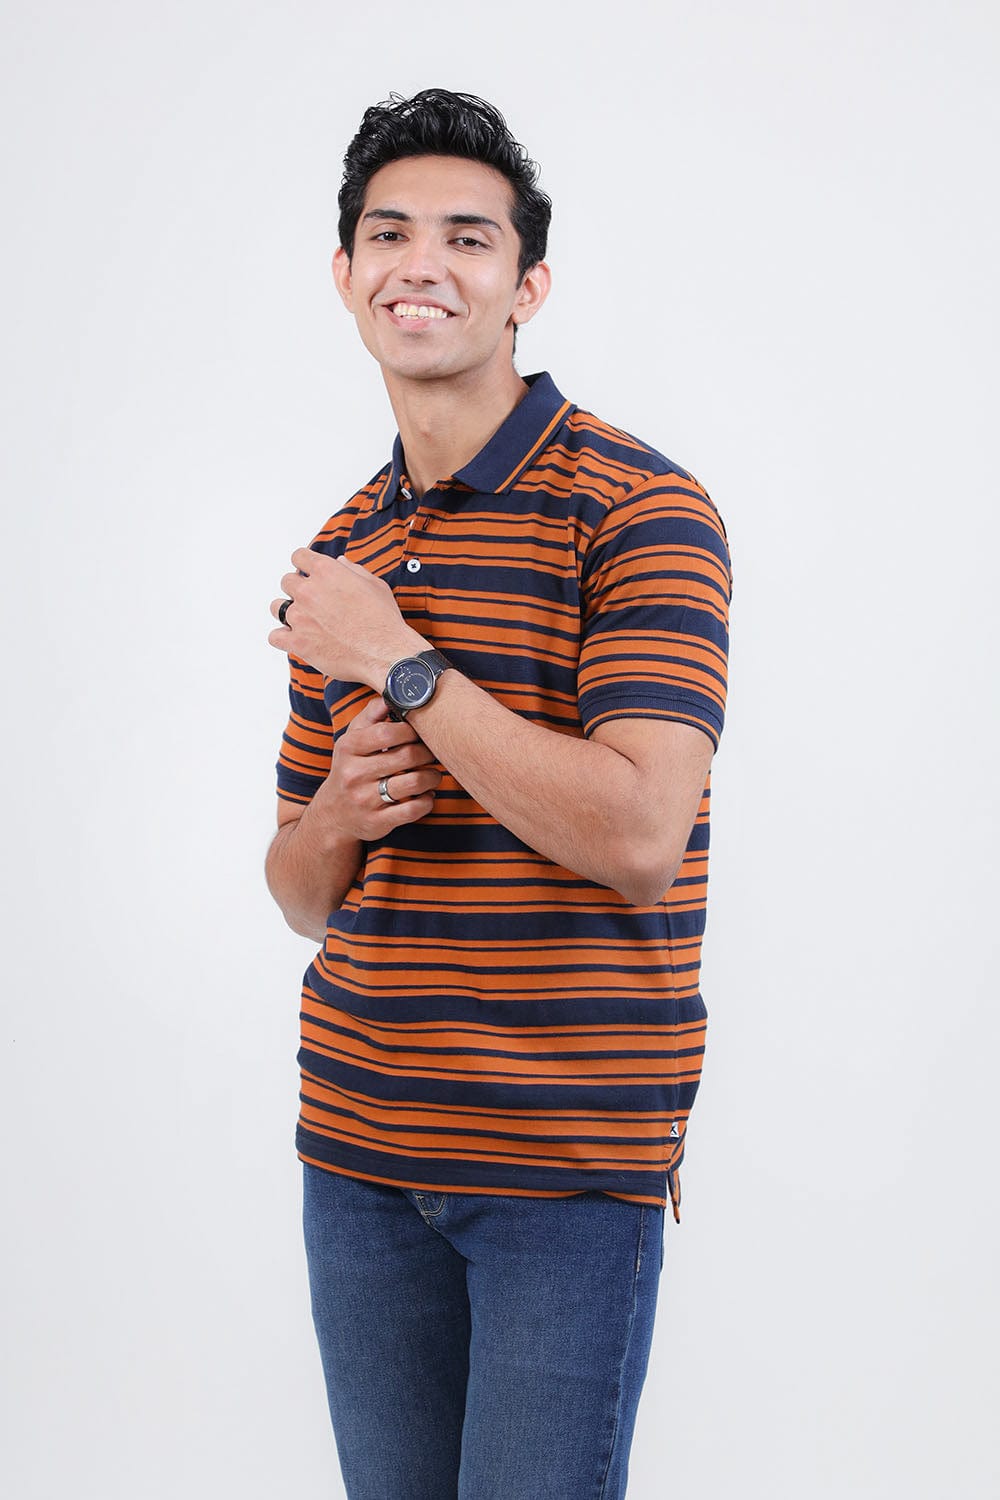 Hope Not Out by Shahid Afridi Men Polo Shirt HNO Orange Yarn Dyed Striped Polo Shirt for Men